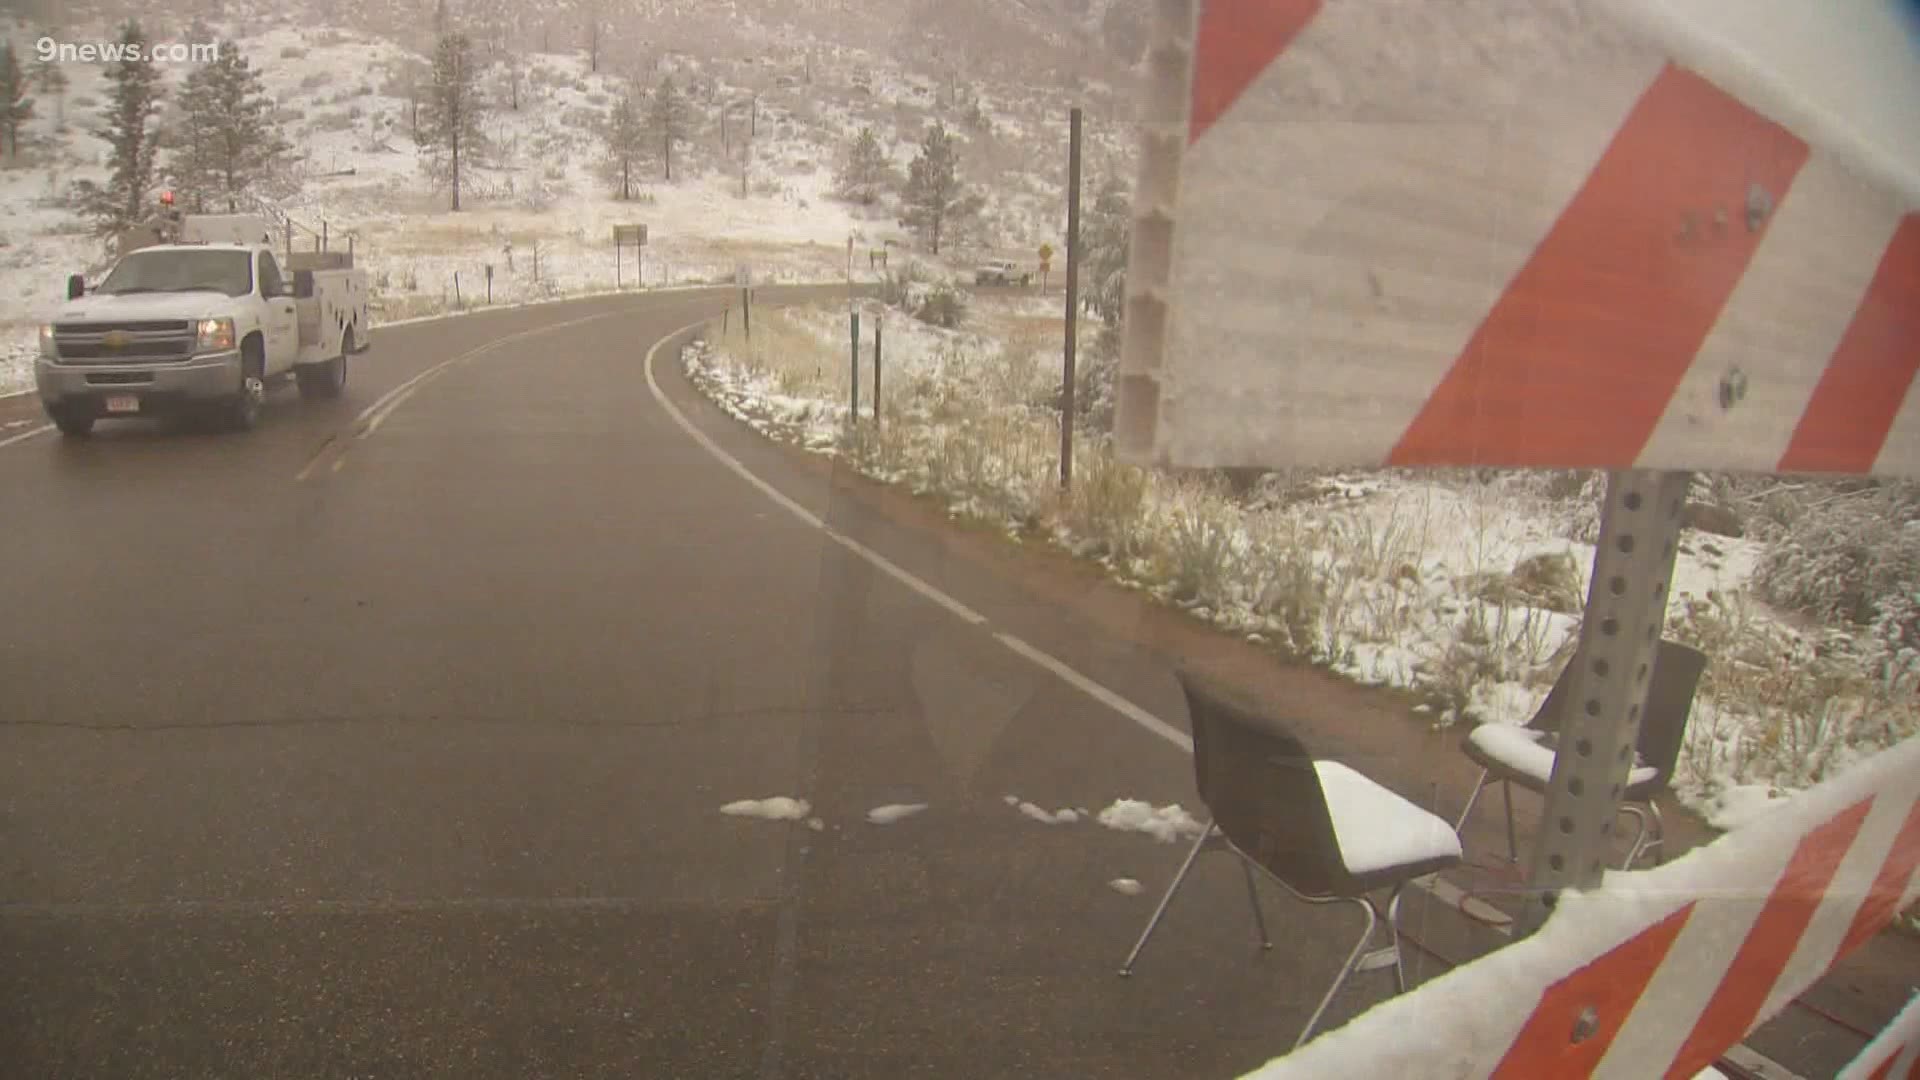 A lot of people affected by the Cameron Peak Fire said it's nice to see snow coming down instead of ash.